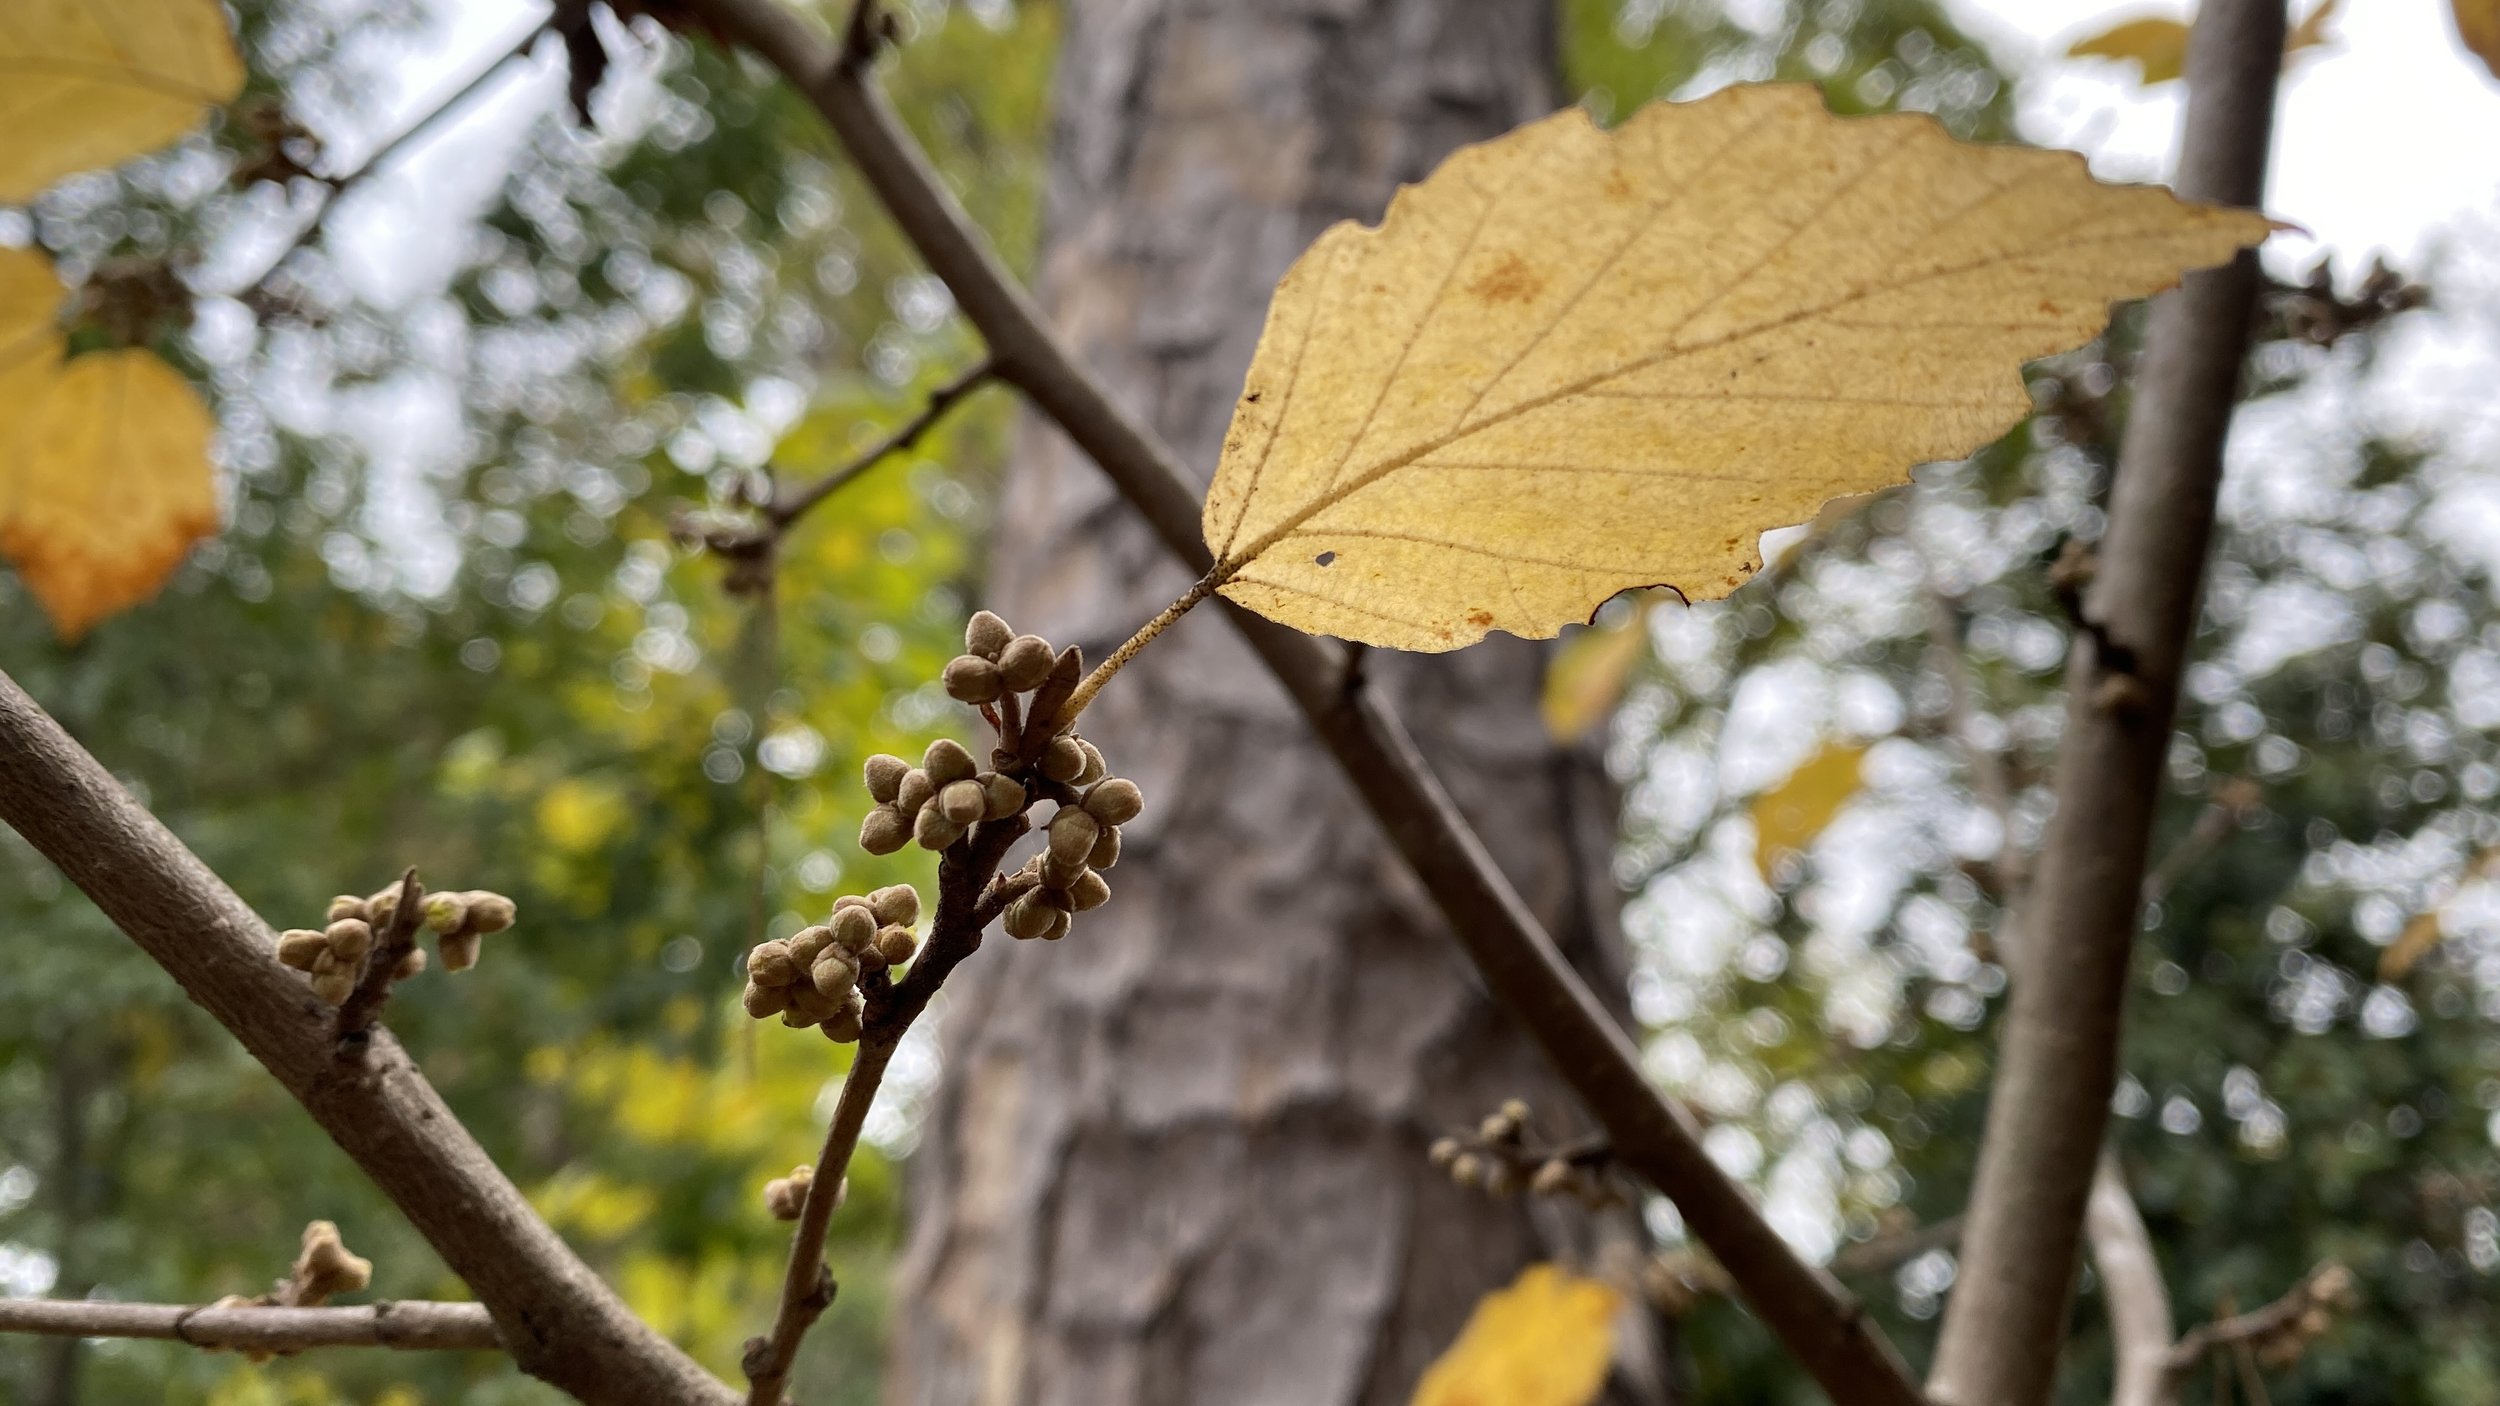  Elizabeth’s original  Hamamelis virginiana  (our native witch hazel) will soon share the fresh, clean scent of its small, yellow spidery flowers. 